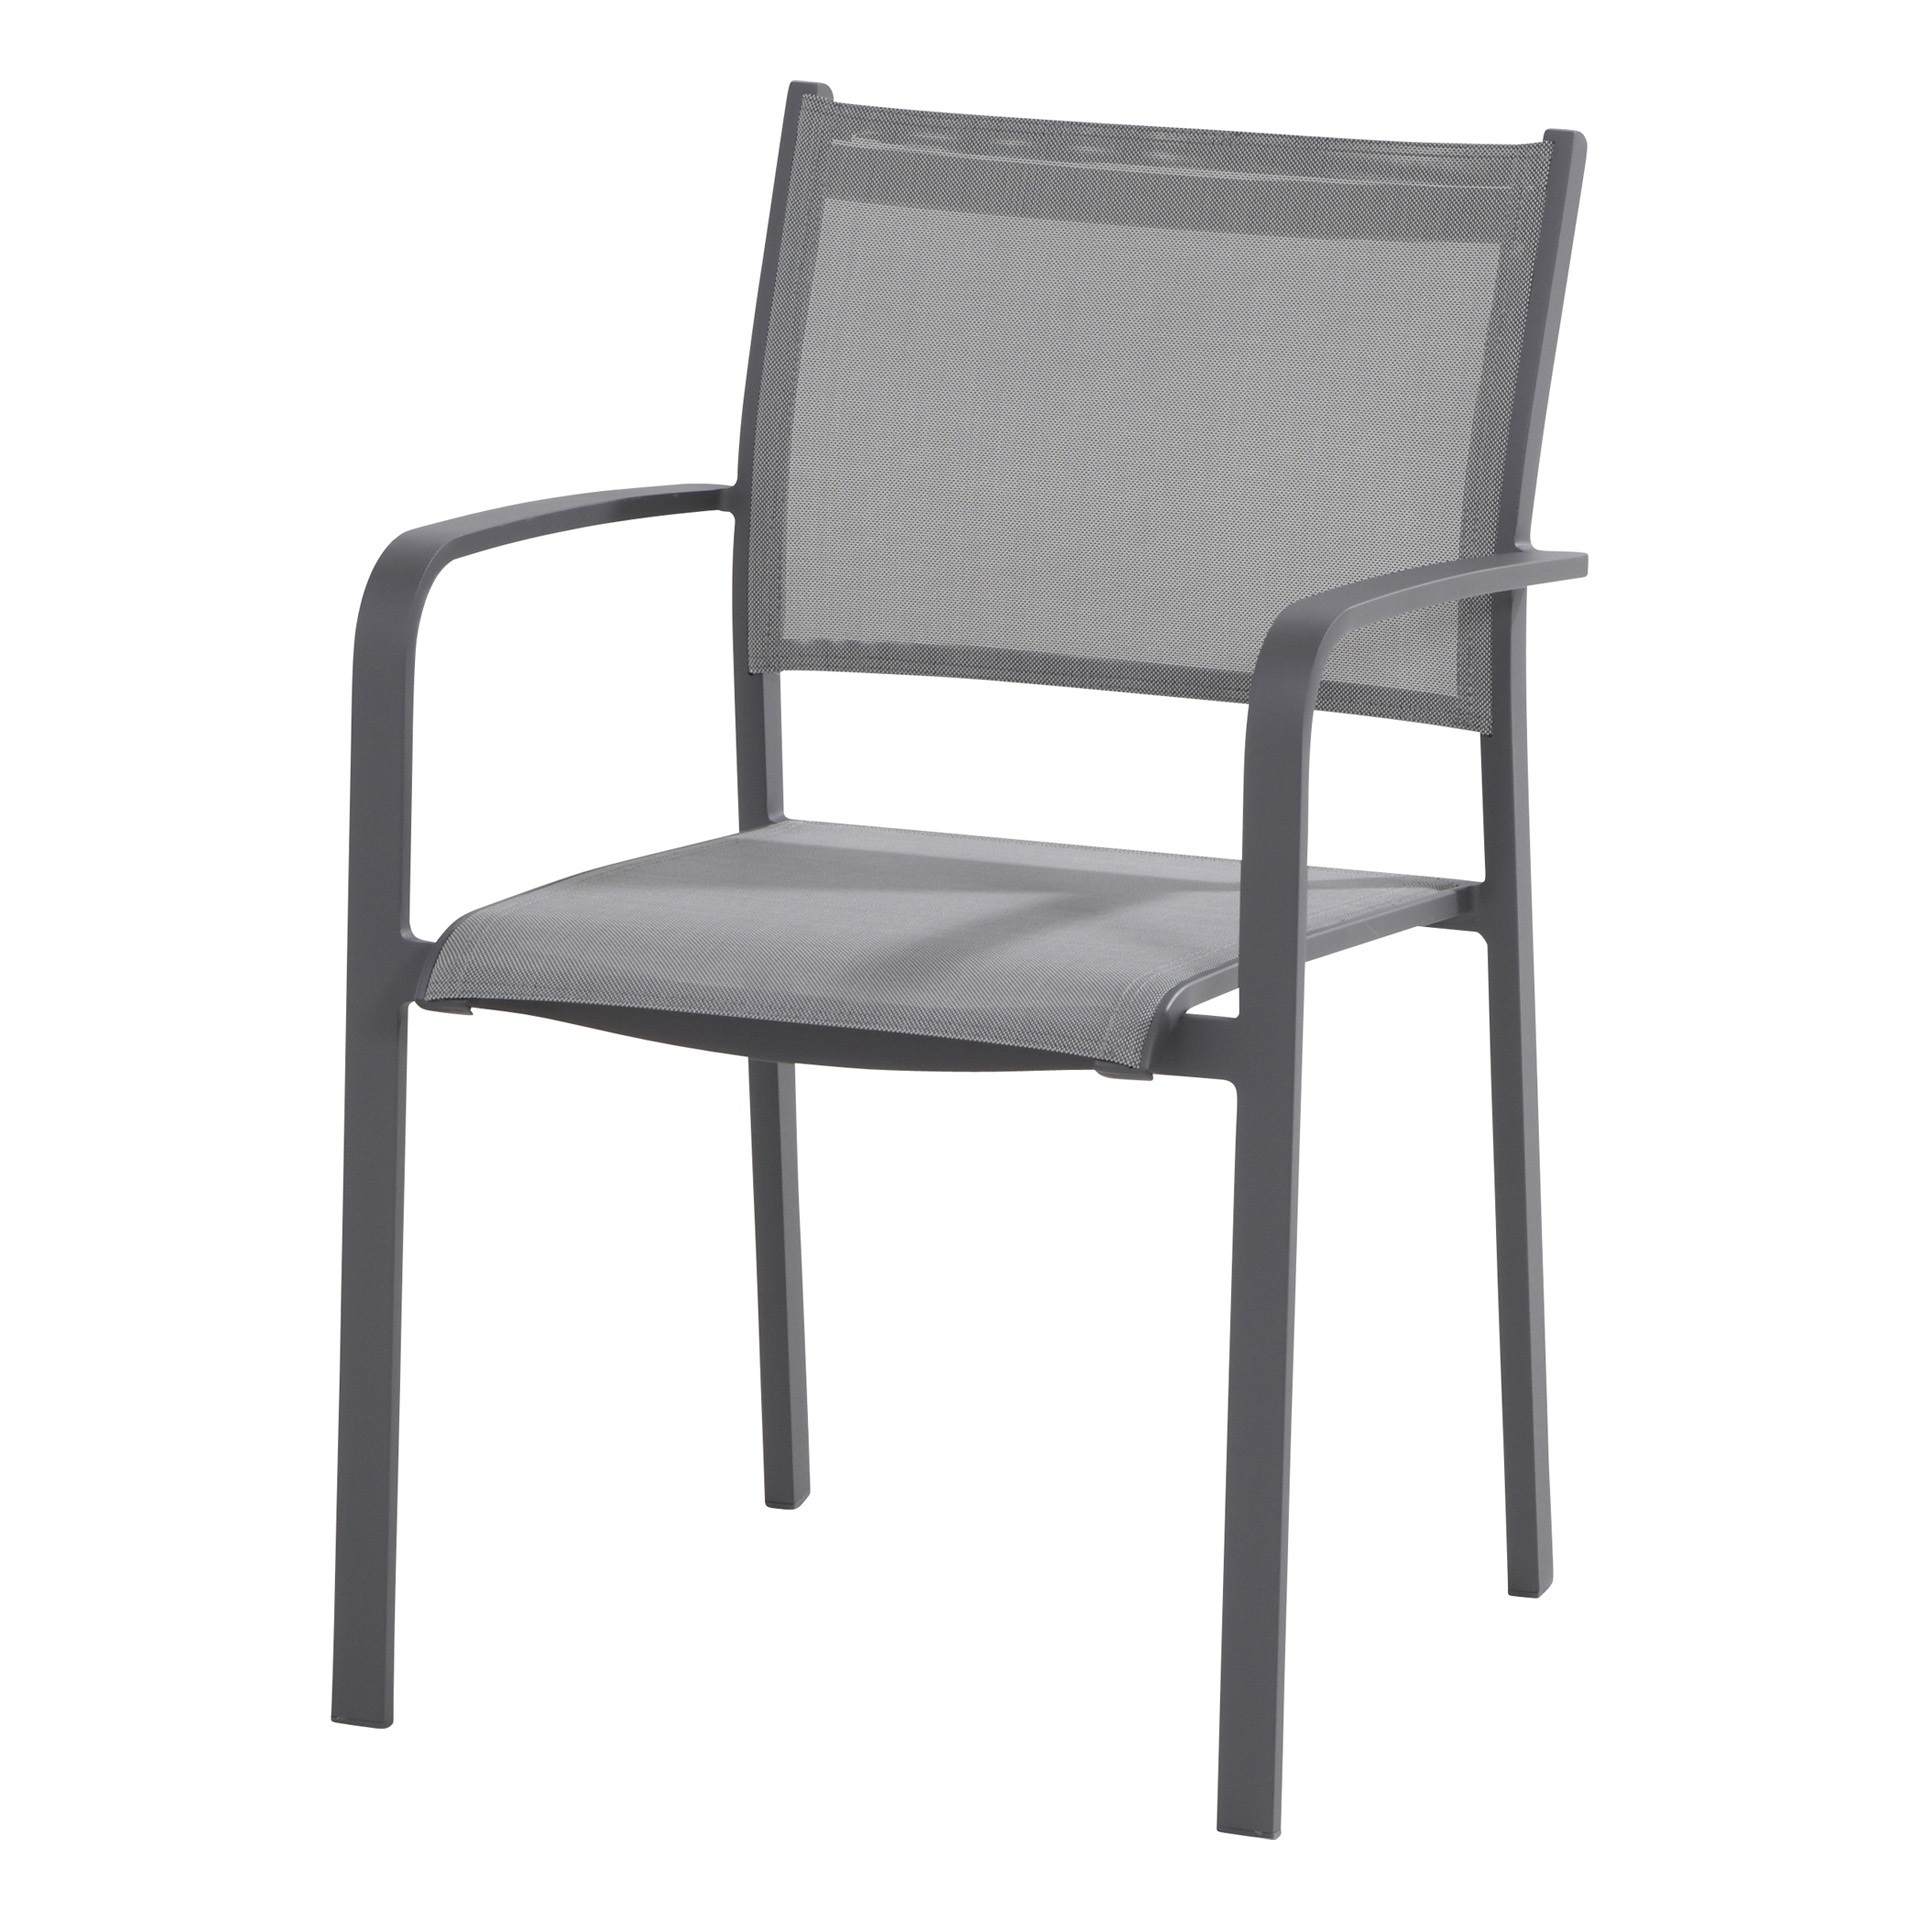 Tosca Dining chair stackable Antracite - low back